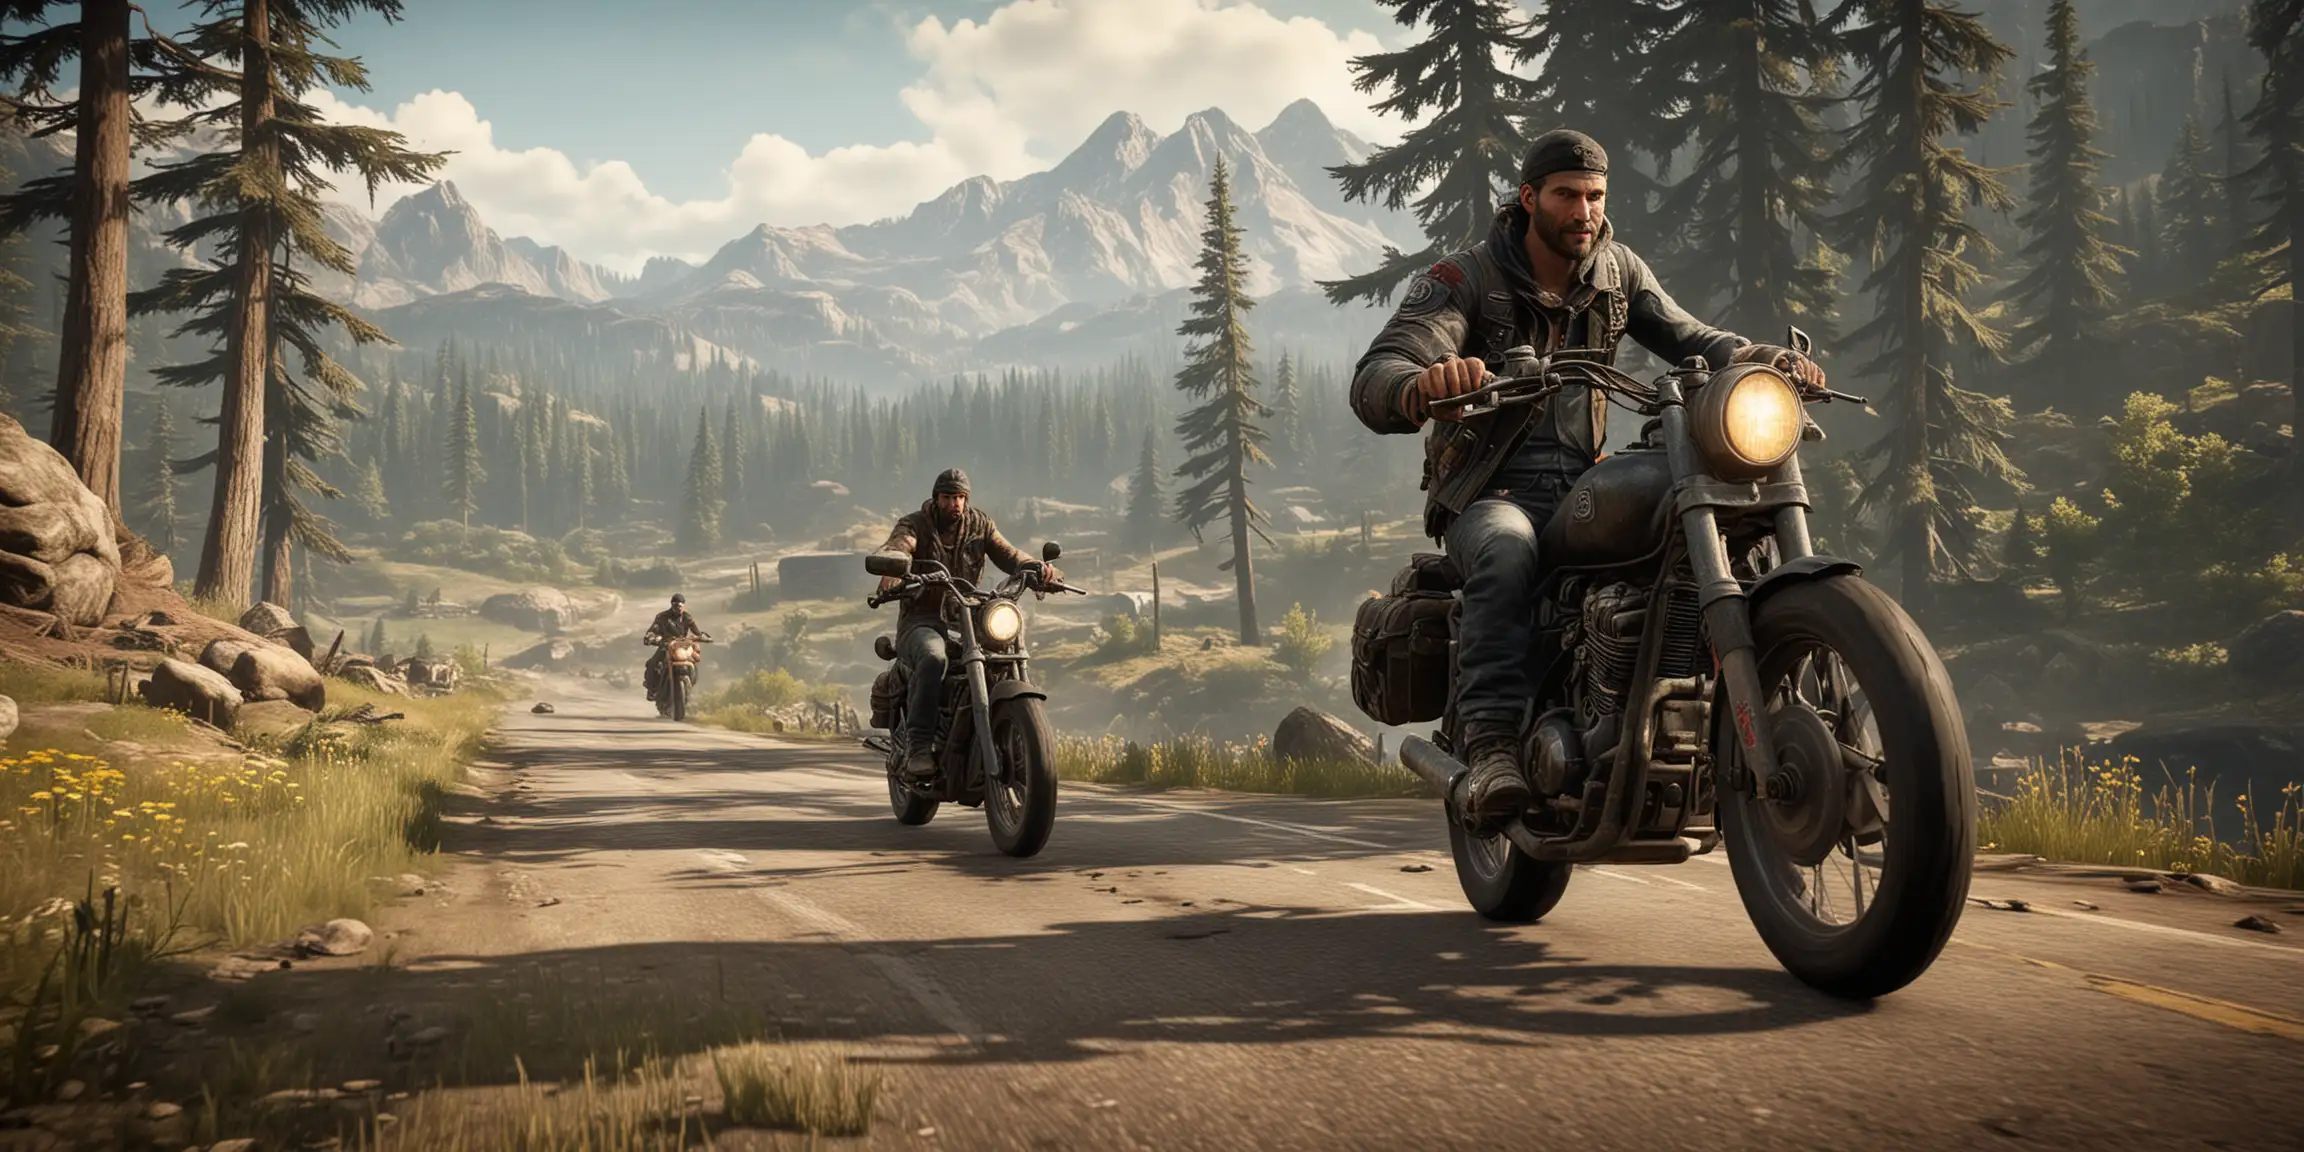 Days gone landscape image with Deacon riding his motorcycle